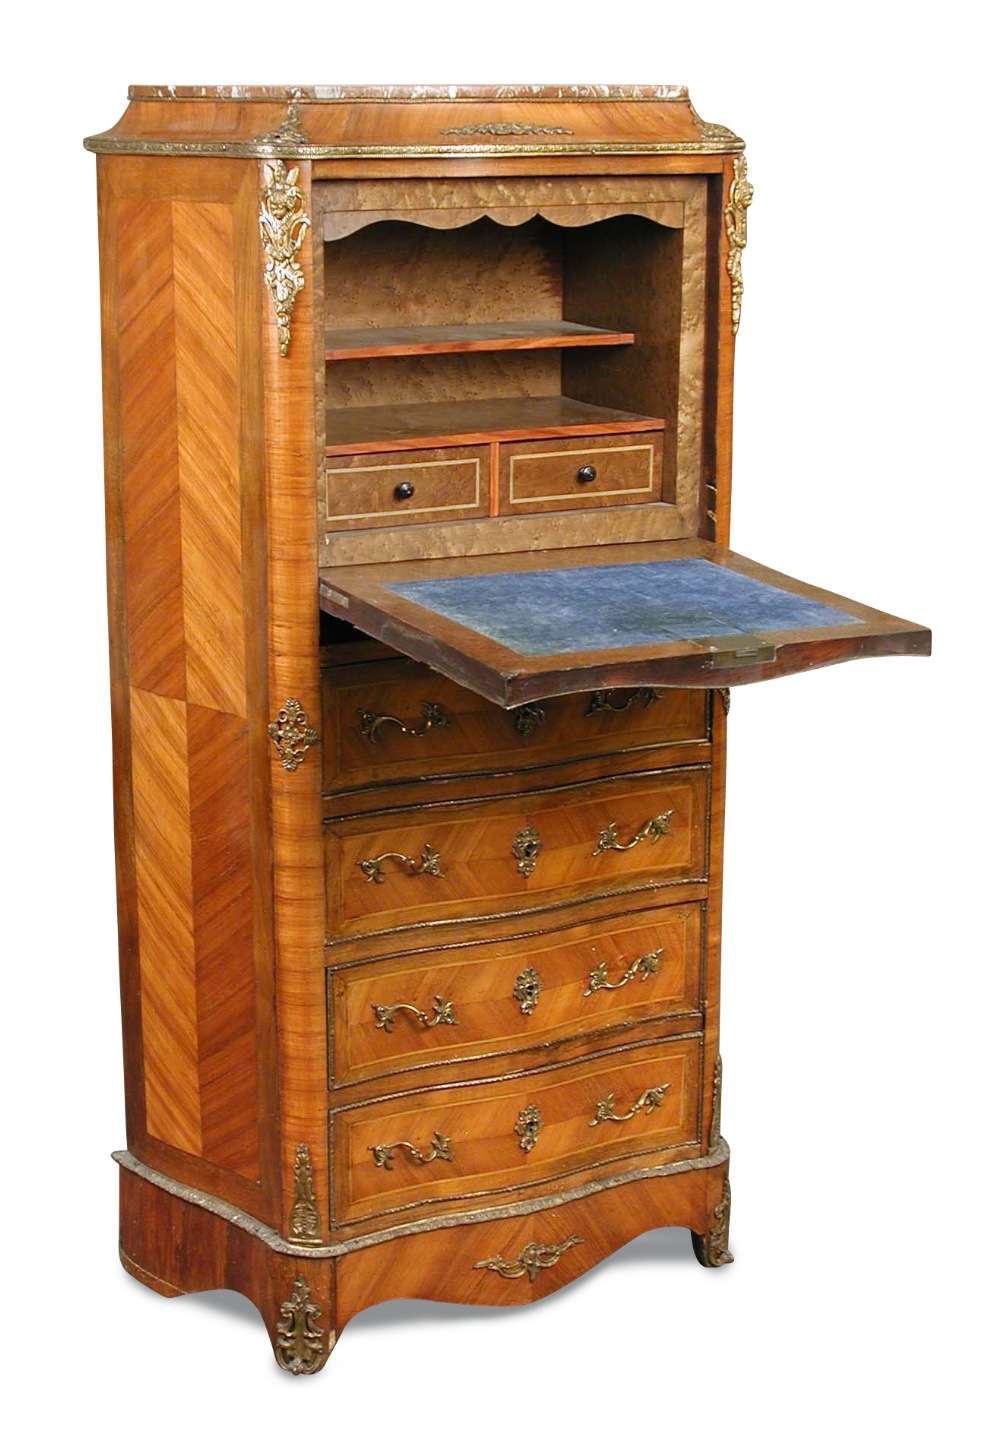 A Louis XV revival tulip wood semaniere, of serpentine outline with marble top and gilt metal